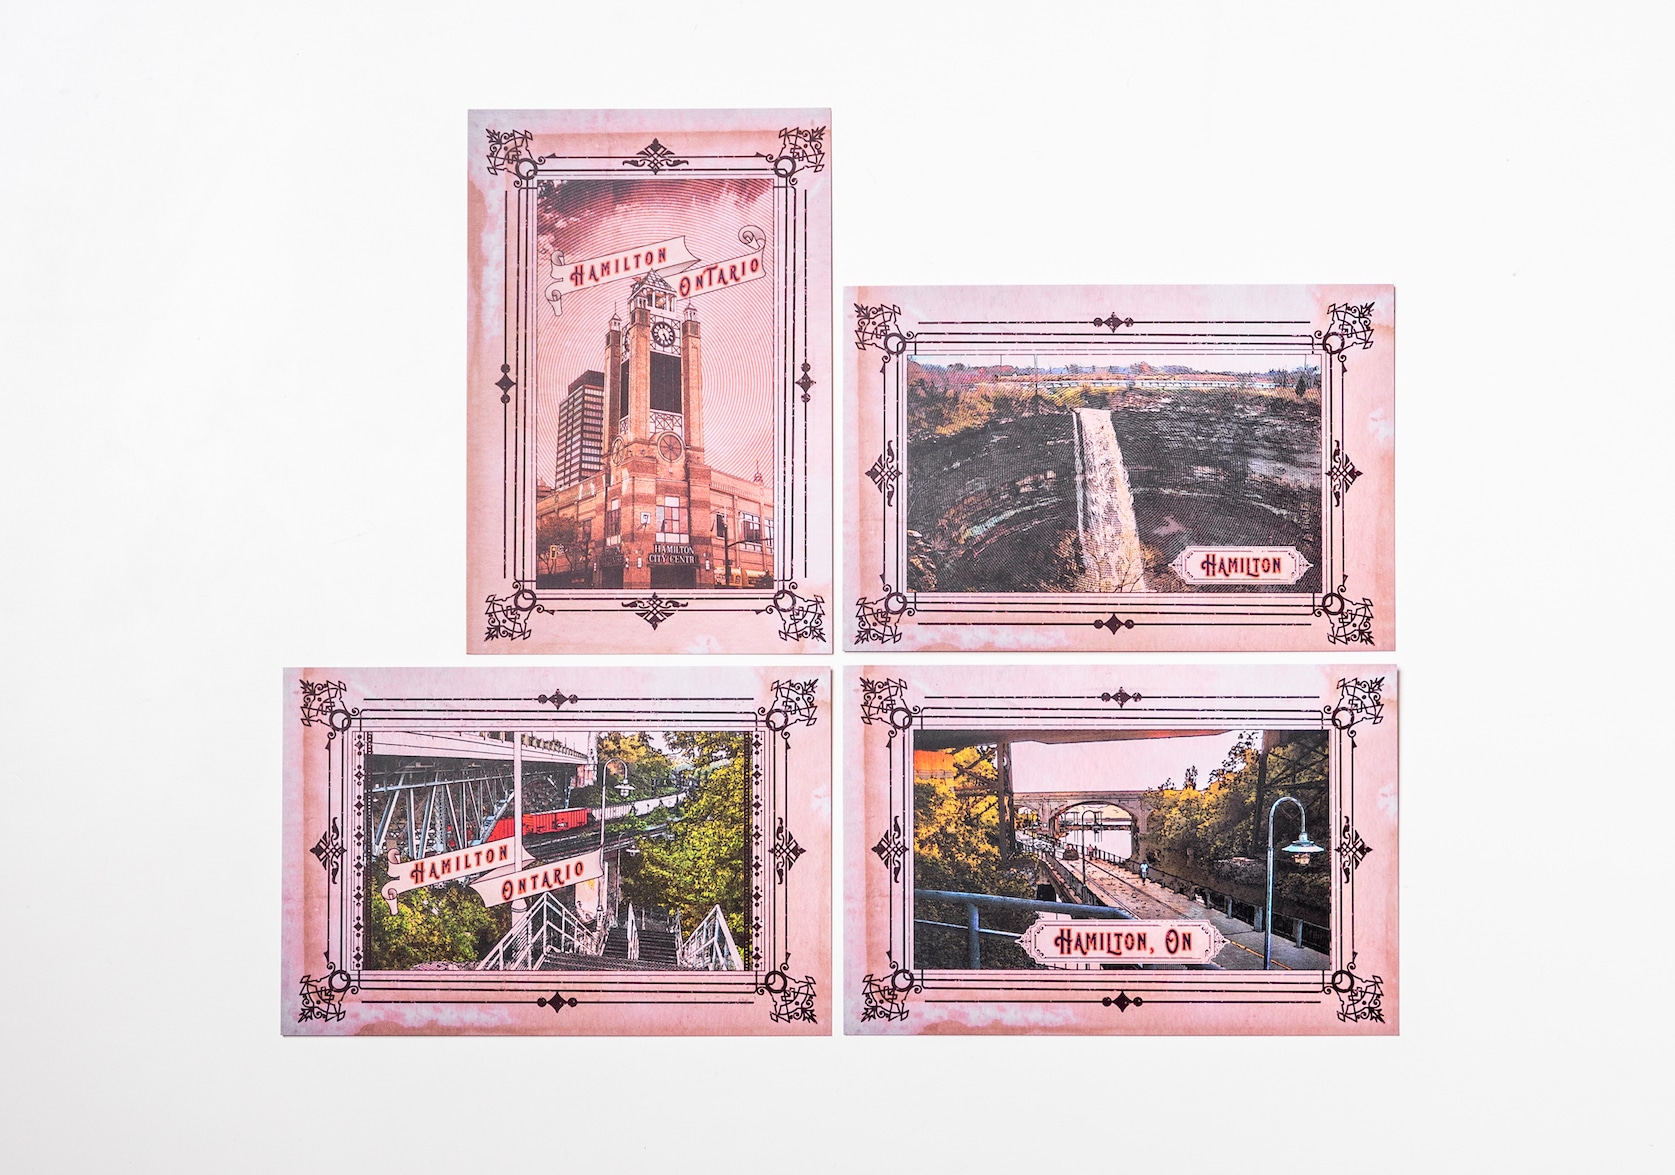 Set of four Hamilton Ontario Postcards. Each postcard features colourful illustrations of different landmarks framed with a black decorative border. A banner is displayed on each postcard with red text that reads: Hamilton or Hamilton, ON or Hamilton, Ontario.